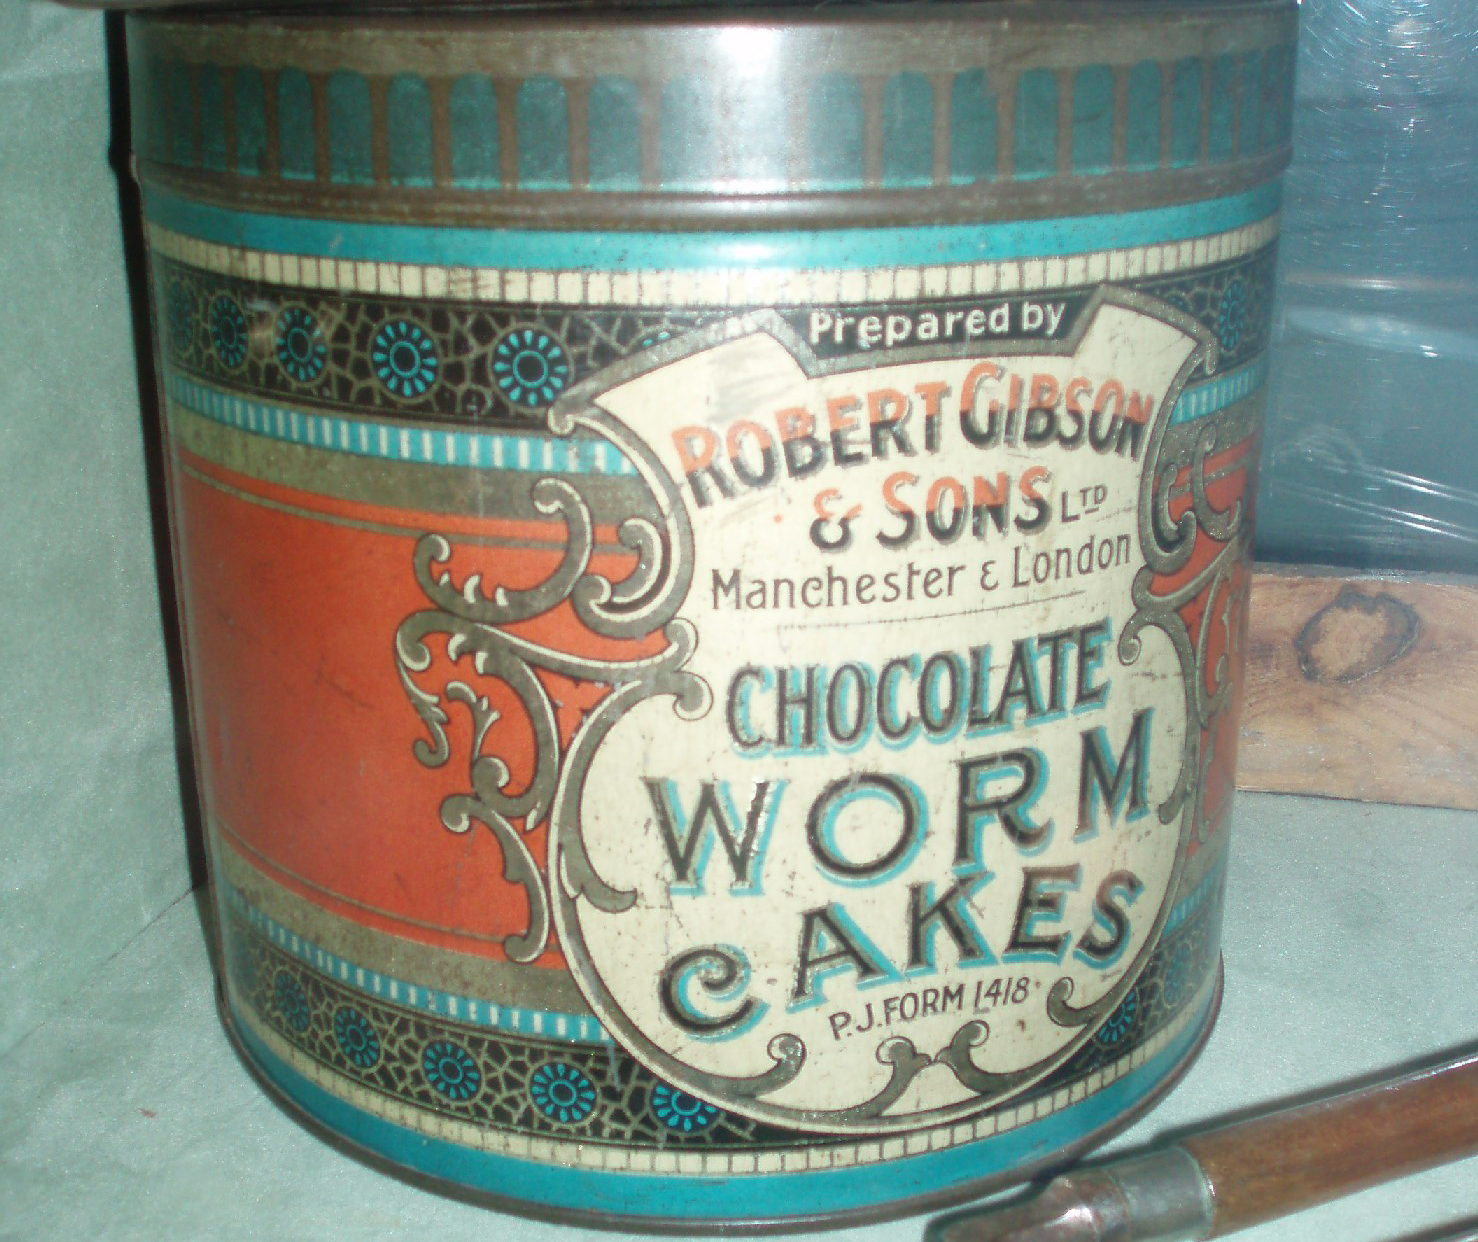 Squat, round metal tin with colourful old label advertising Chocolate Worm Cakes.